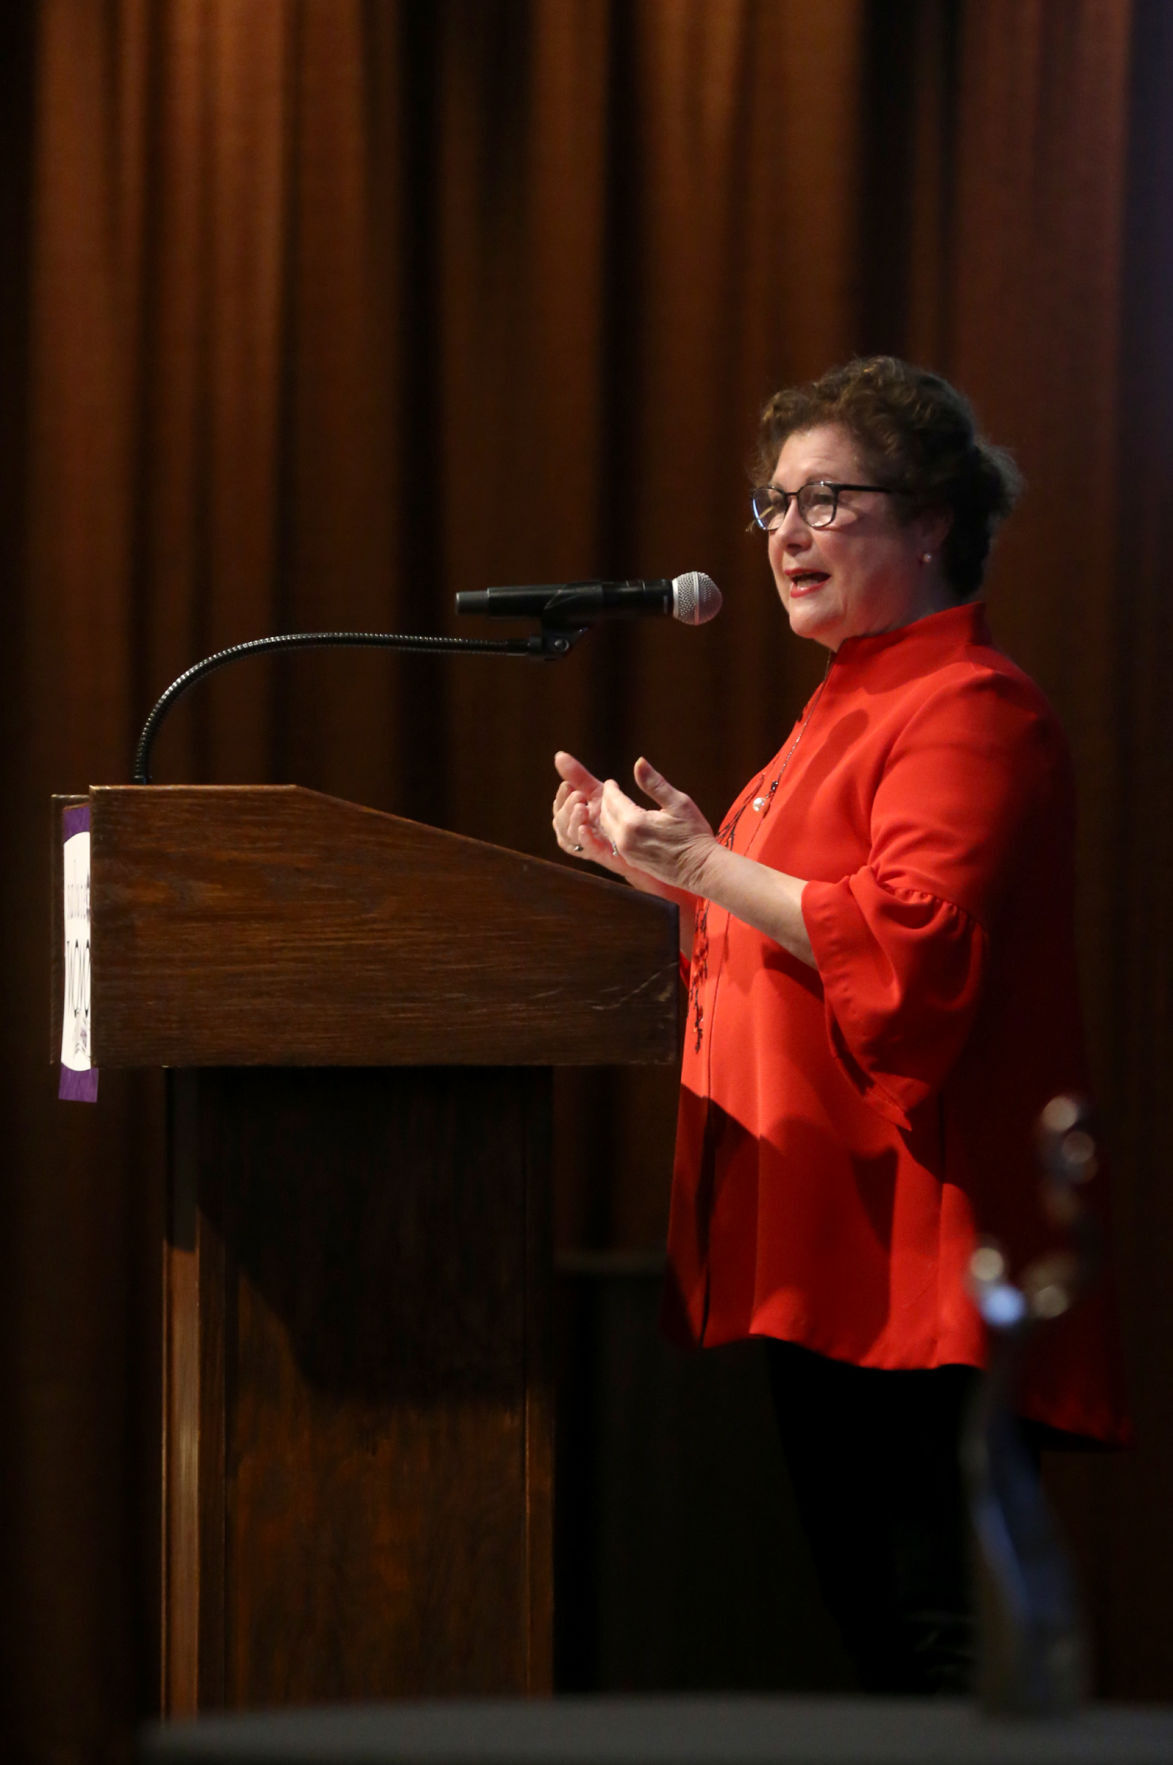 Teri Hawks Goodmann received the award for Woman of the Year.    PHOTO CREDIT: JESSICA REILLY